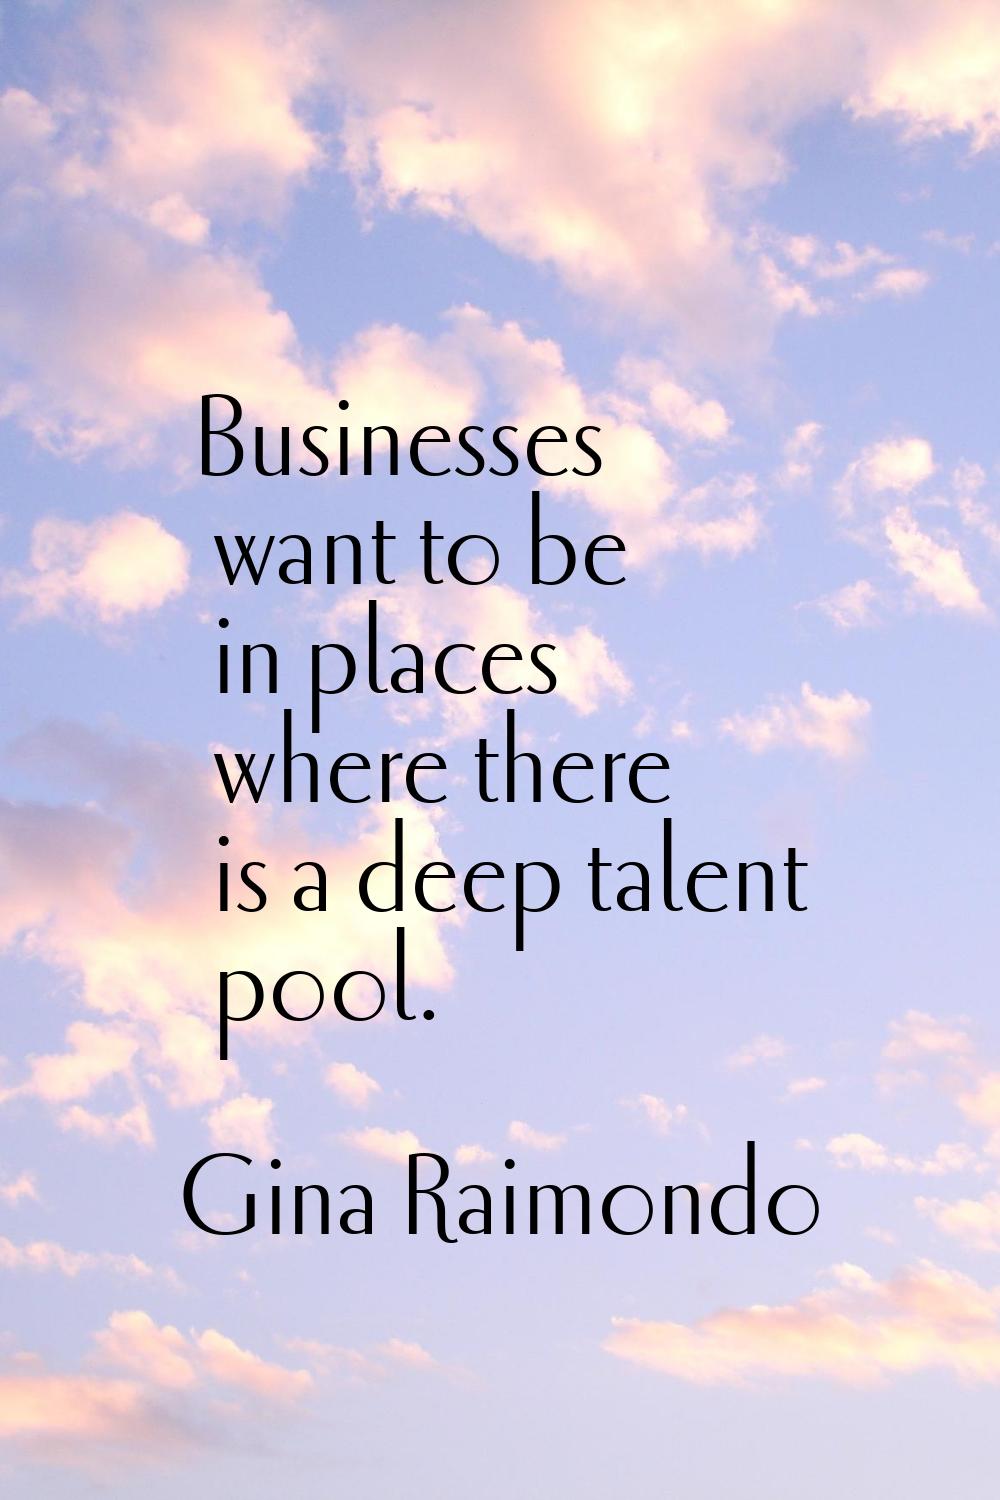 Businesses want to be in places where there is a deep talent pool.